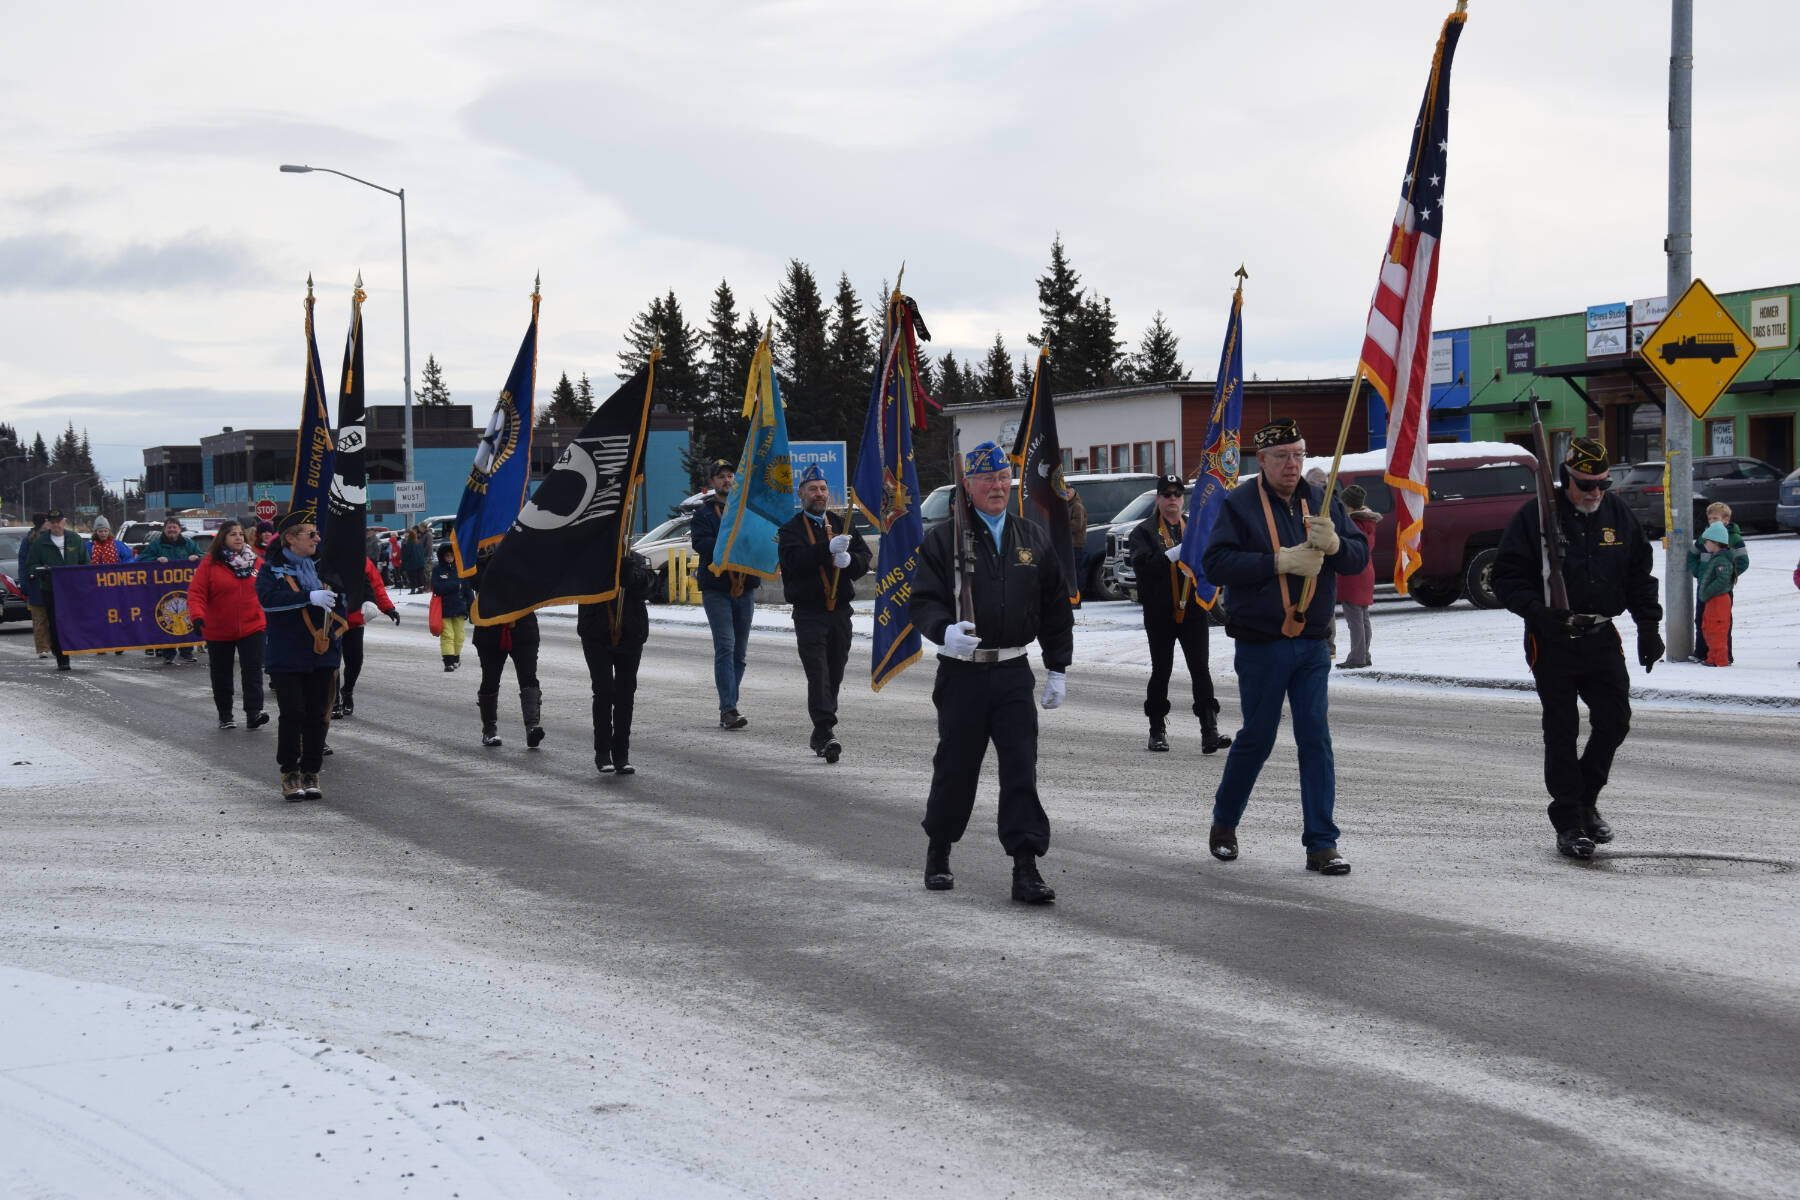 Members of the VFW Post 10221, American Legion Post 16, American Legion Auxiliary, Homer Elks and Emblem Clubs and members of the community march down Pioneer Avenue during the Veterans Day parade on Saturday, Nov. 11, 2023 in Homer, Alaska. (Delcenia Cosman/Homer News)